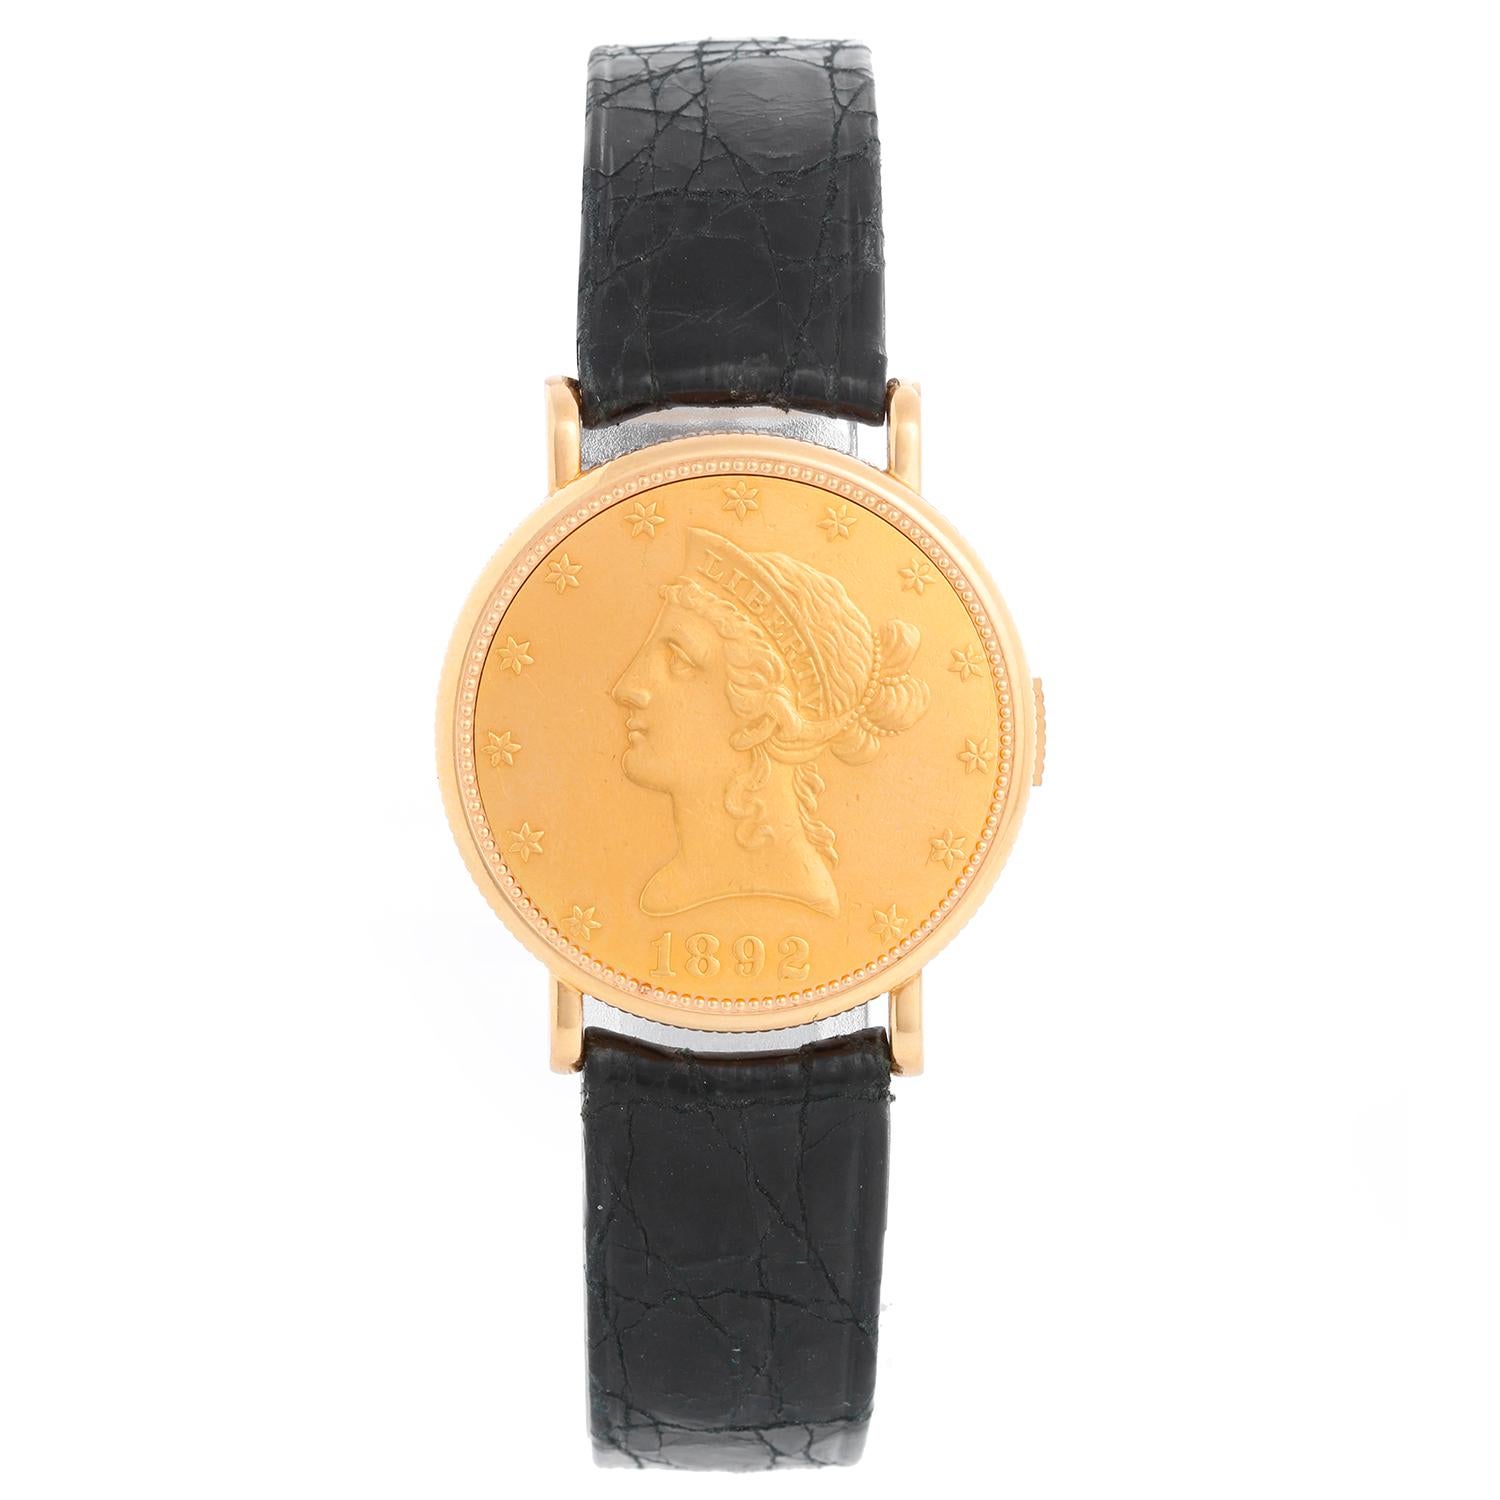 Piaget Coin Collection 18k Yellow Gold Watch - Manual movement. 18K Yellow gold ( 28 mm ) with smooth bezel. Rose dial with stick hour markers. Piaget strap with gold buckle.. Pre-owned with Piaget box. 